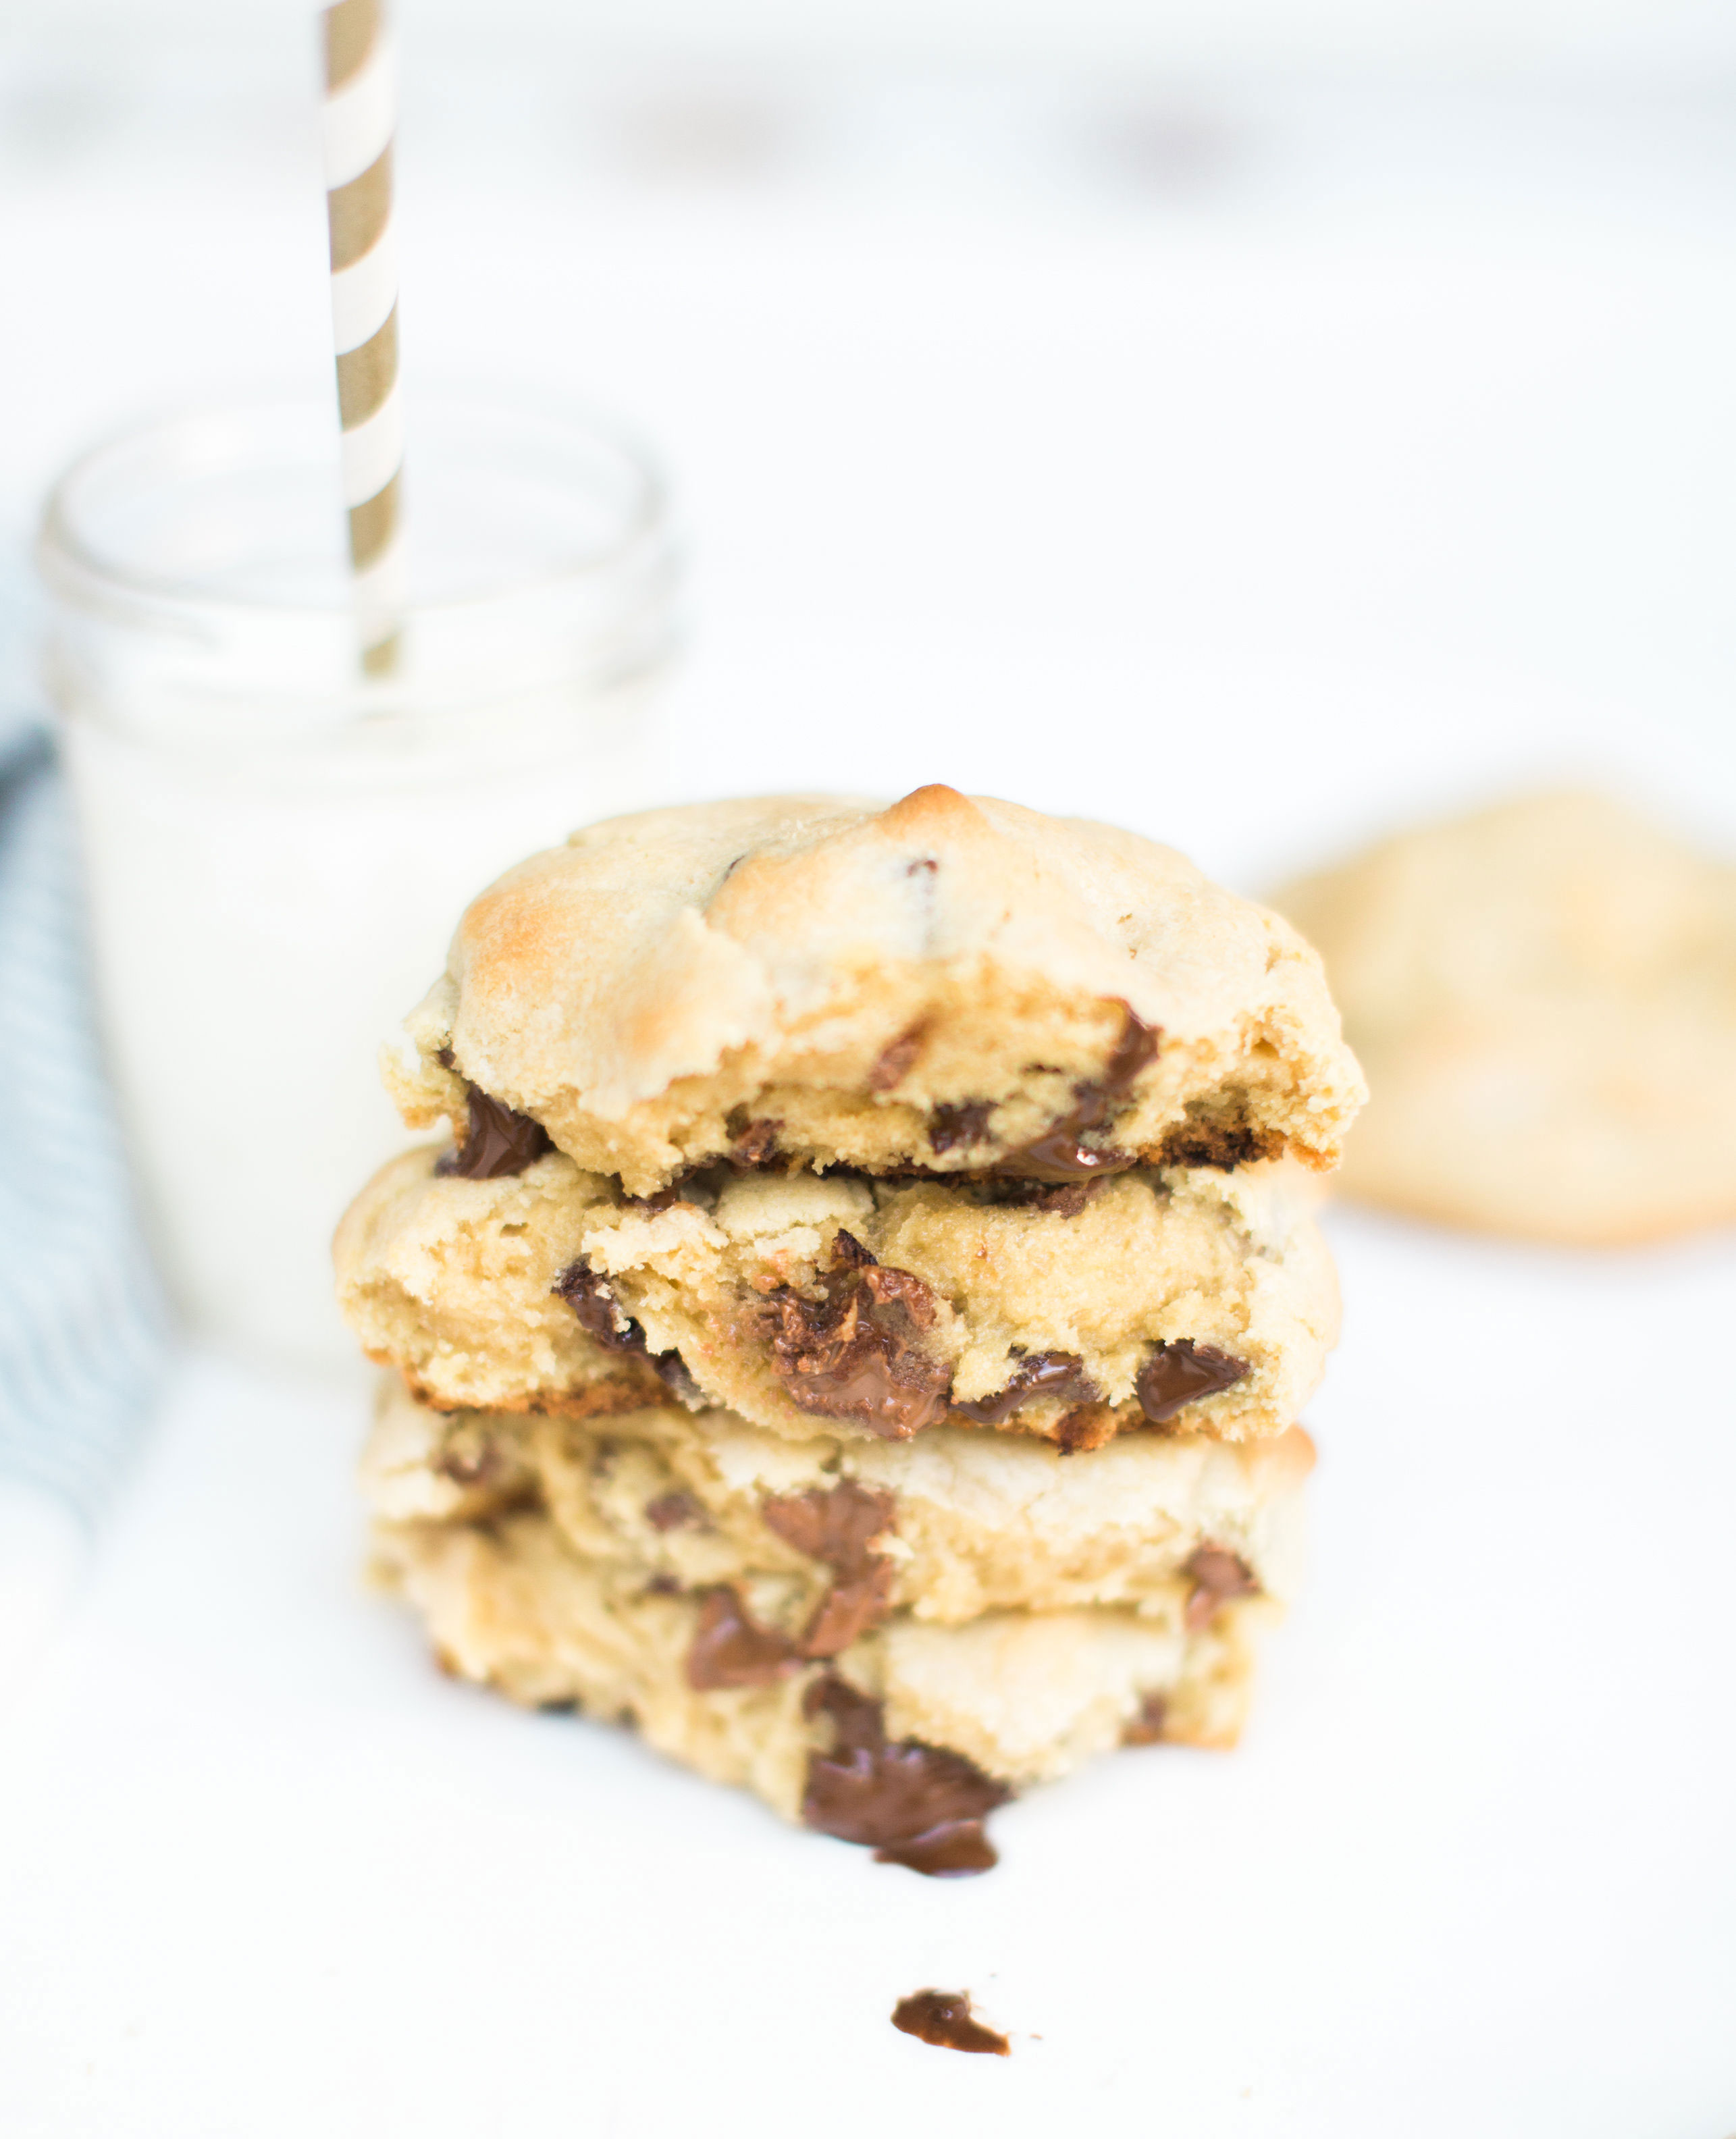 Here it is! The Famous Levain Bakery Chocolate Chip Cookie Recipe that all of New York City is obsessed with; plus a few little tweaks that had our whole family totally crushing on these. You have got to try these super thick, gooey, and decadent #cookies. Click through for the #recipe. #levainbakery #chocolatechipcookies #levainbakerychocolatechipcookies #famouscookies | glitterinc.com | @glitterinc